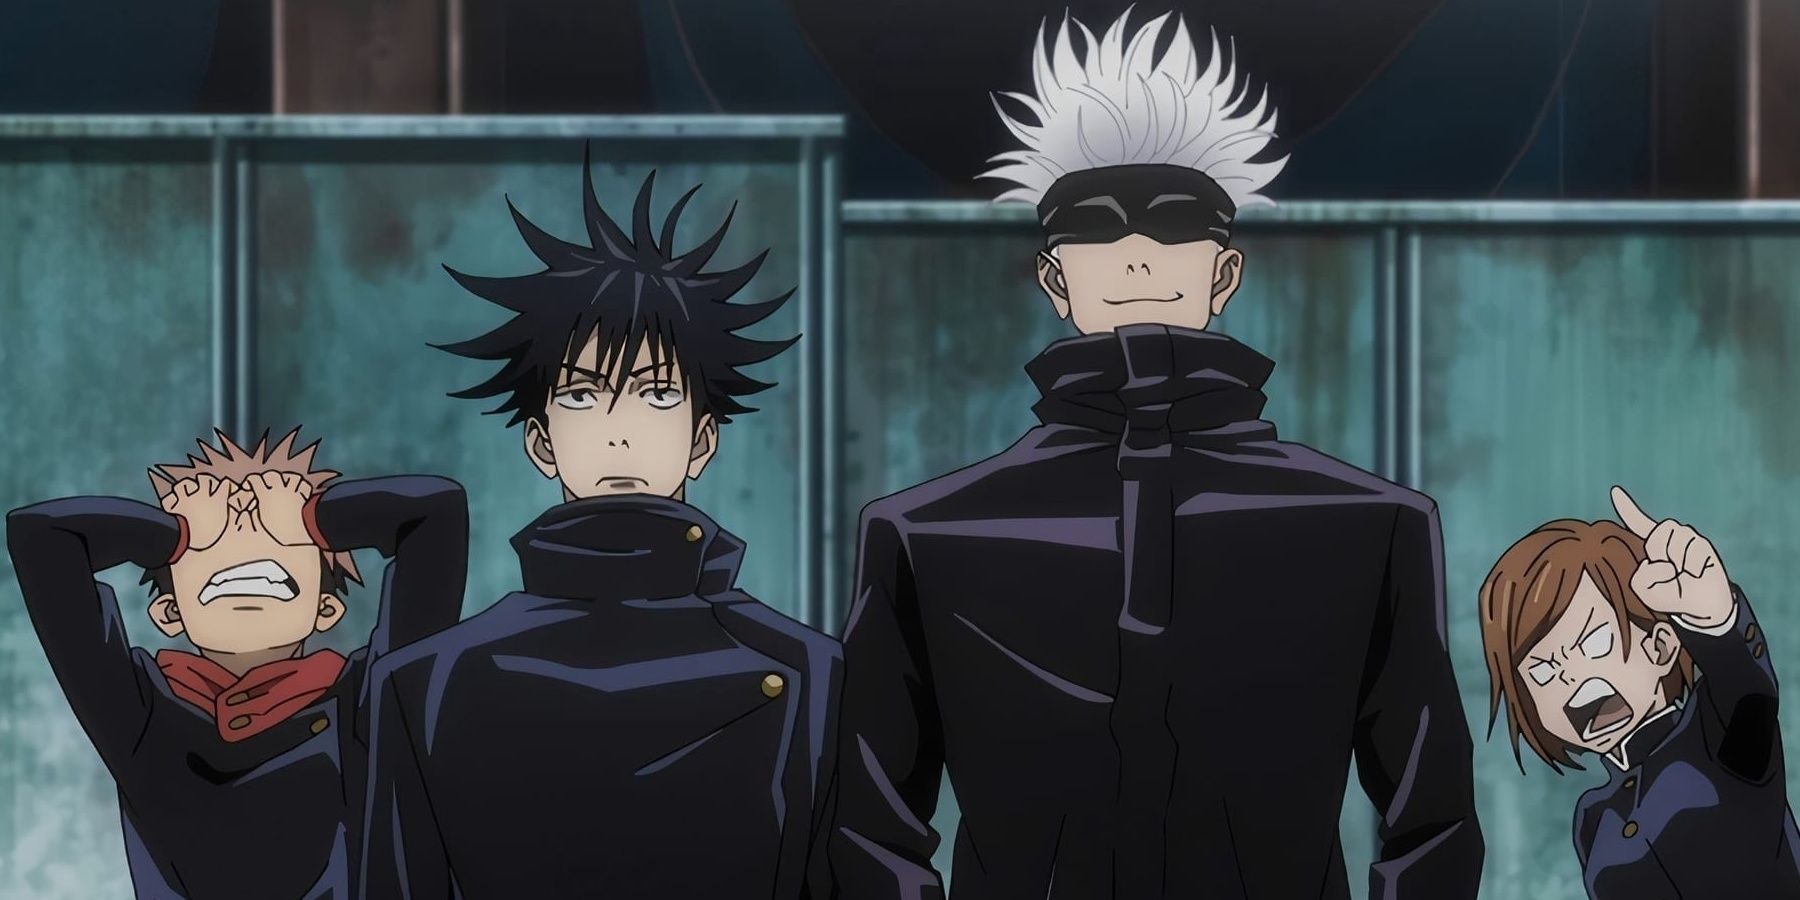 The main cast of characters in Jujutsu Kaisen